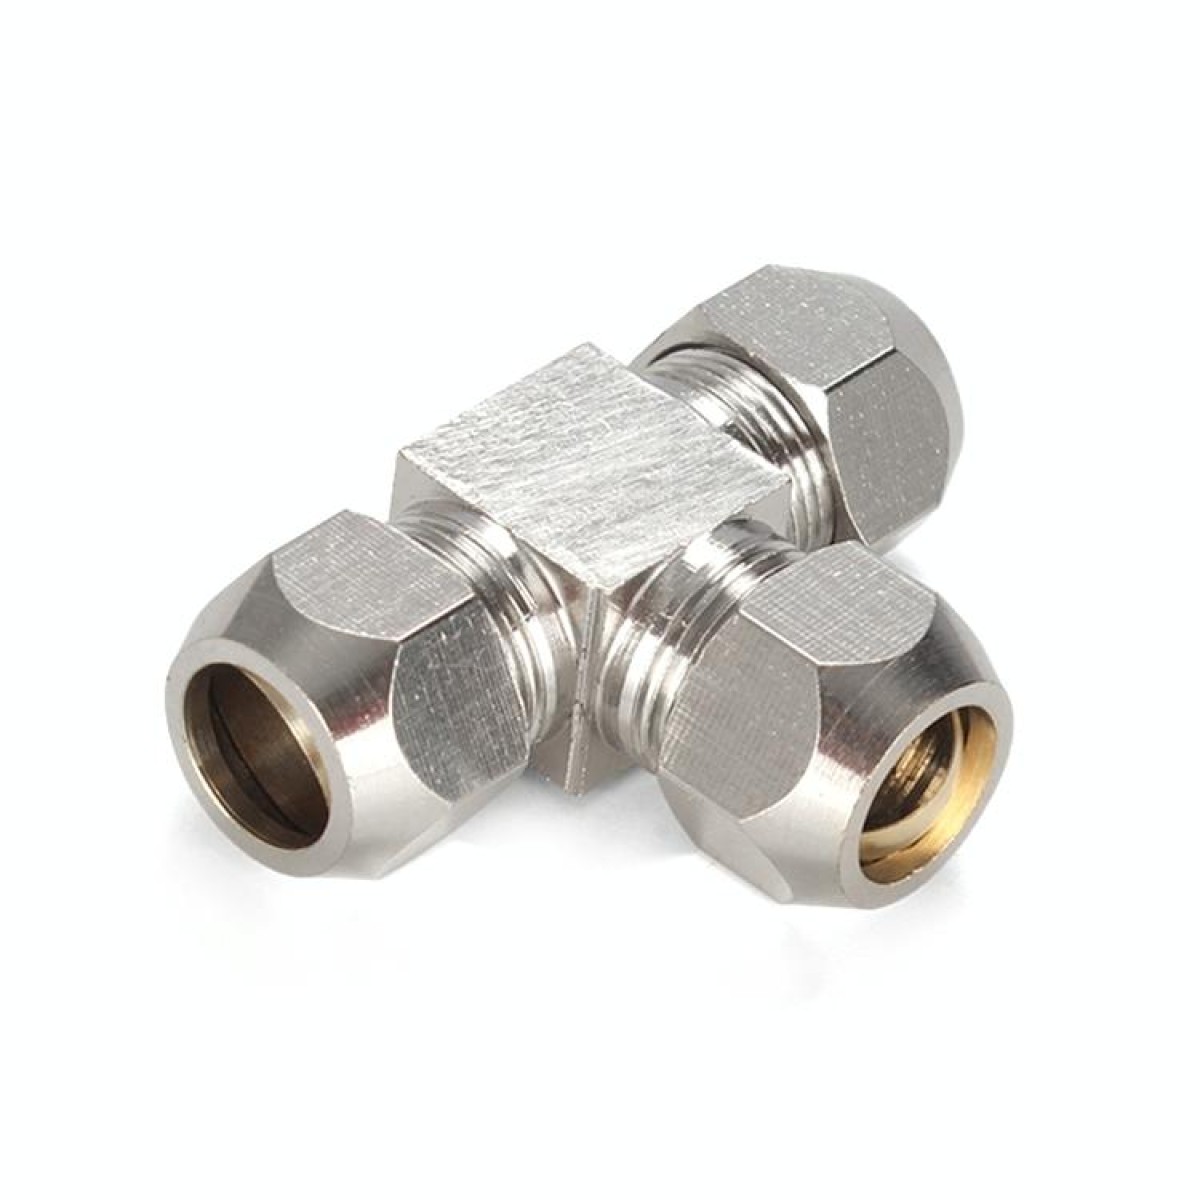 KT-PE-4 LAIZE Nickel Plated Copper T Type Tee Pneumatic Quick Fitting Copper Pipe Connector